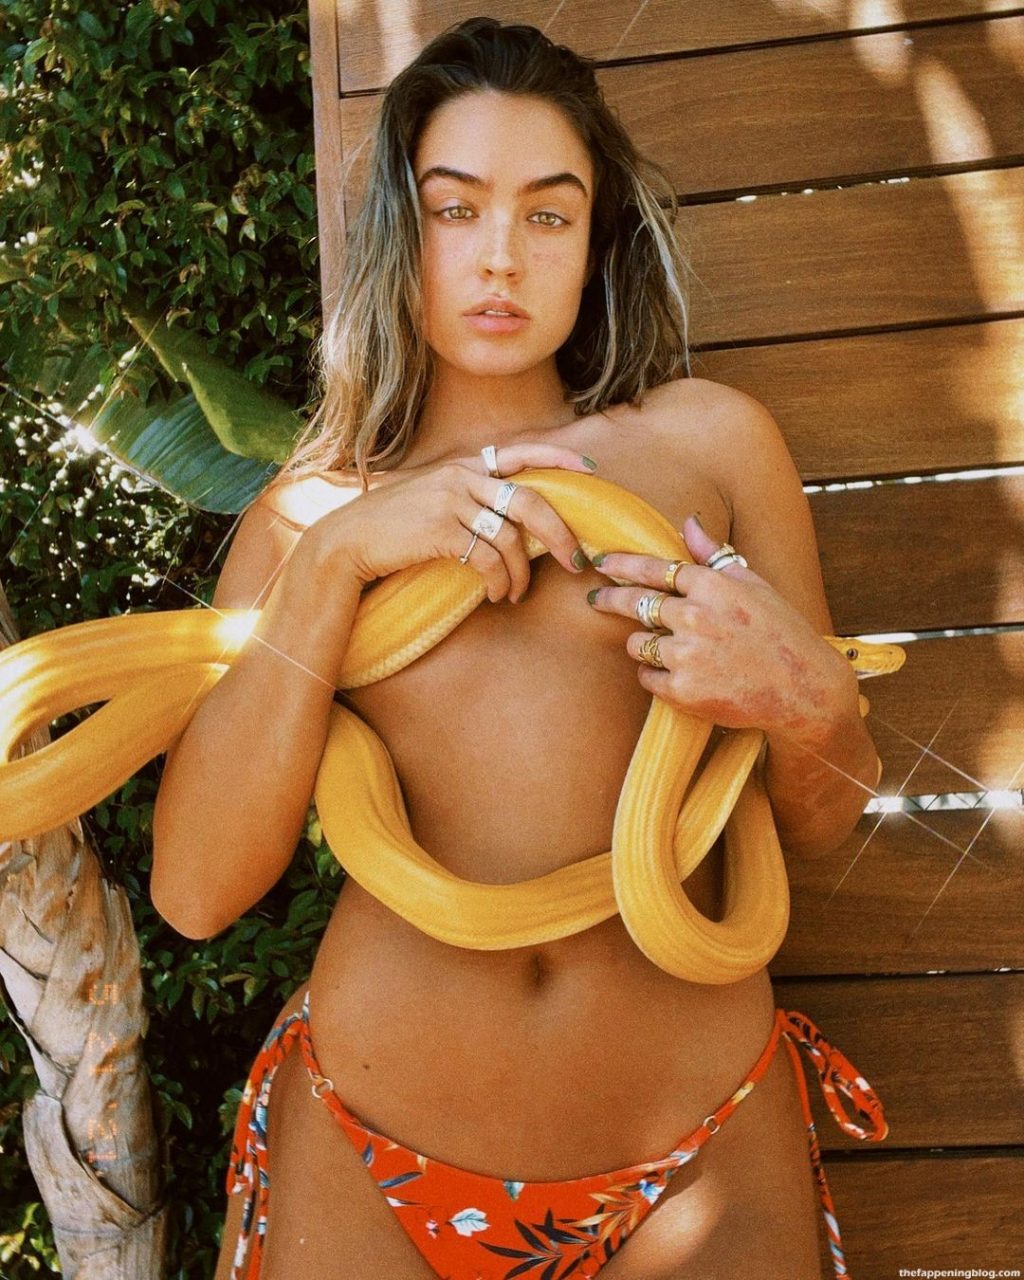 Sommer ray nudes